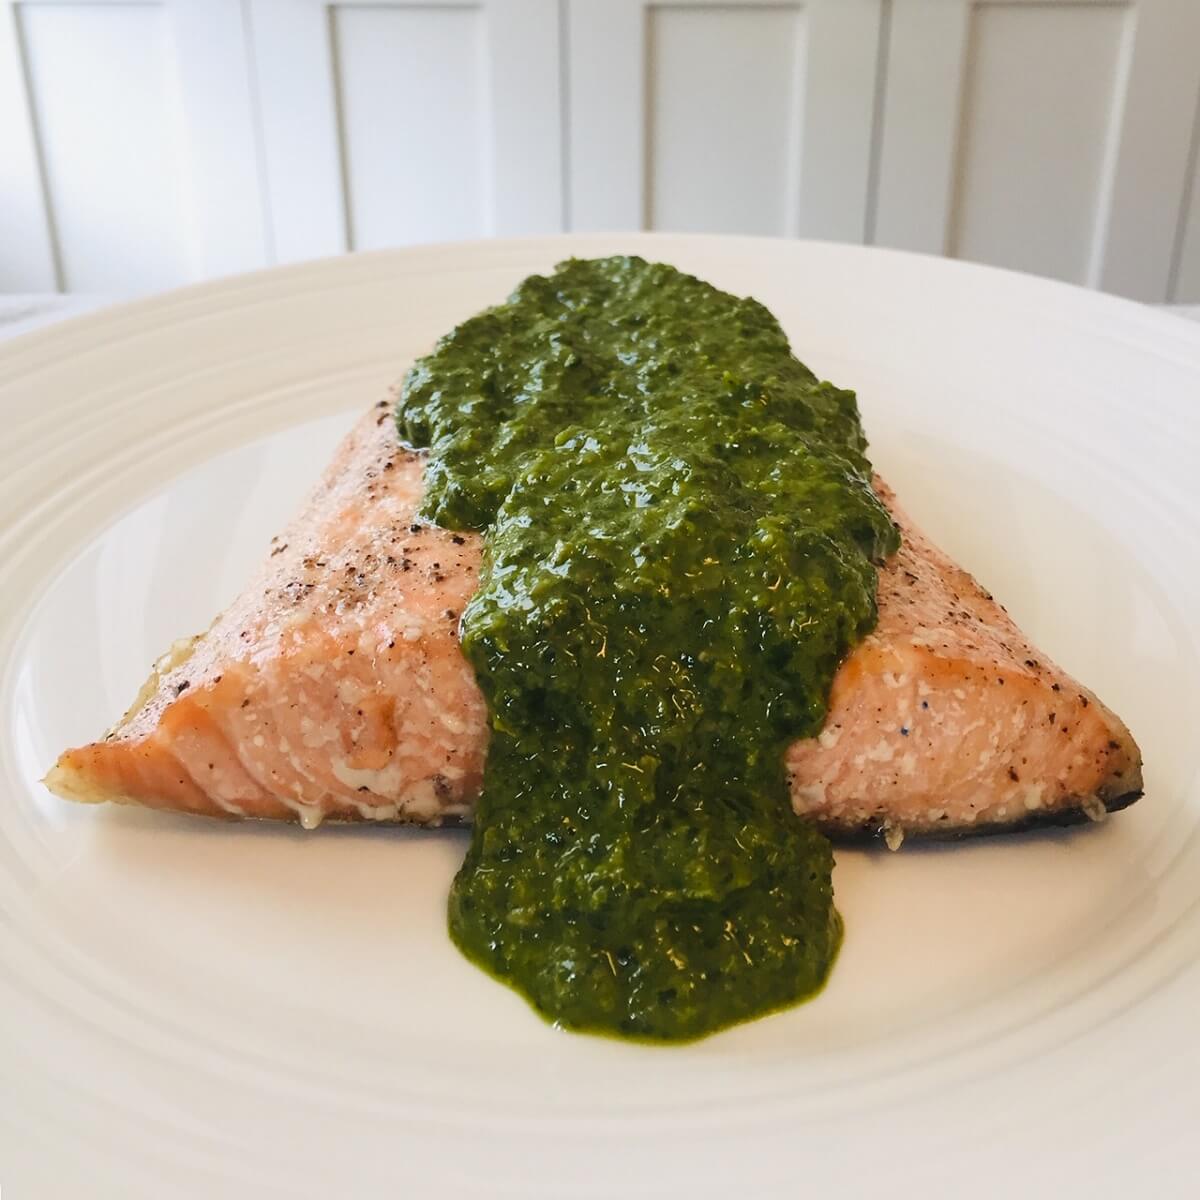 A piece of fish smothered in a green lemon herb sauce.